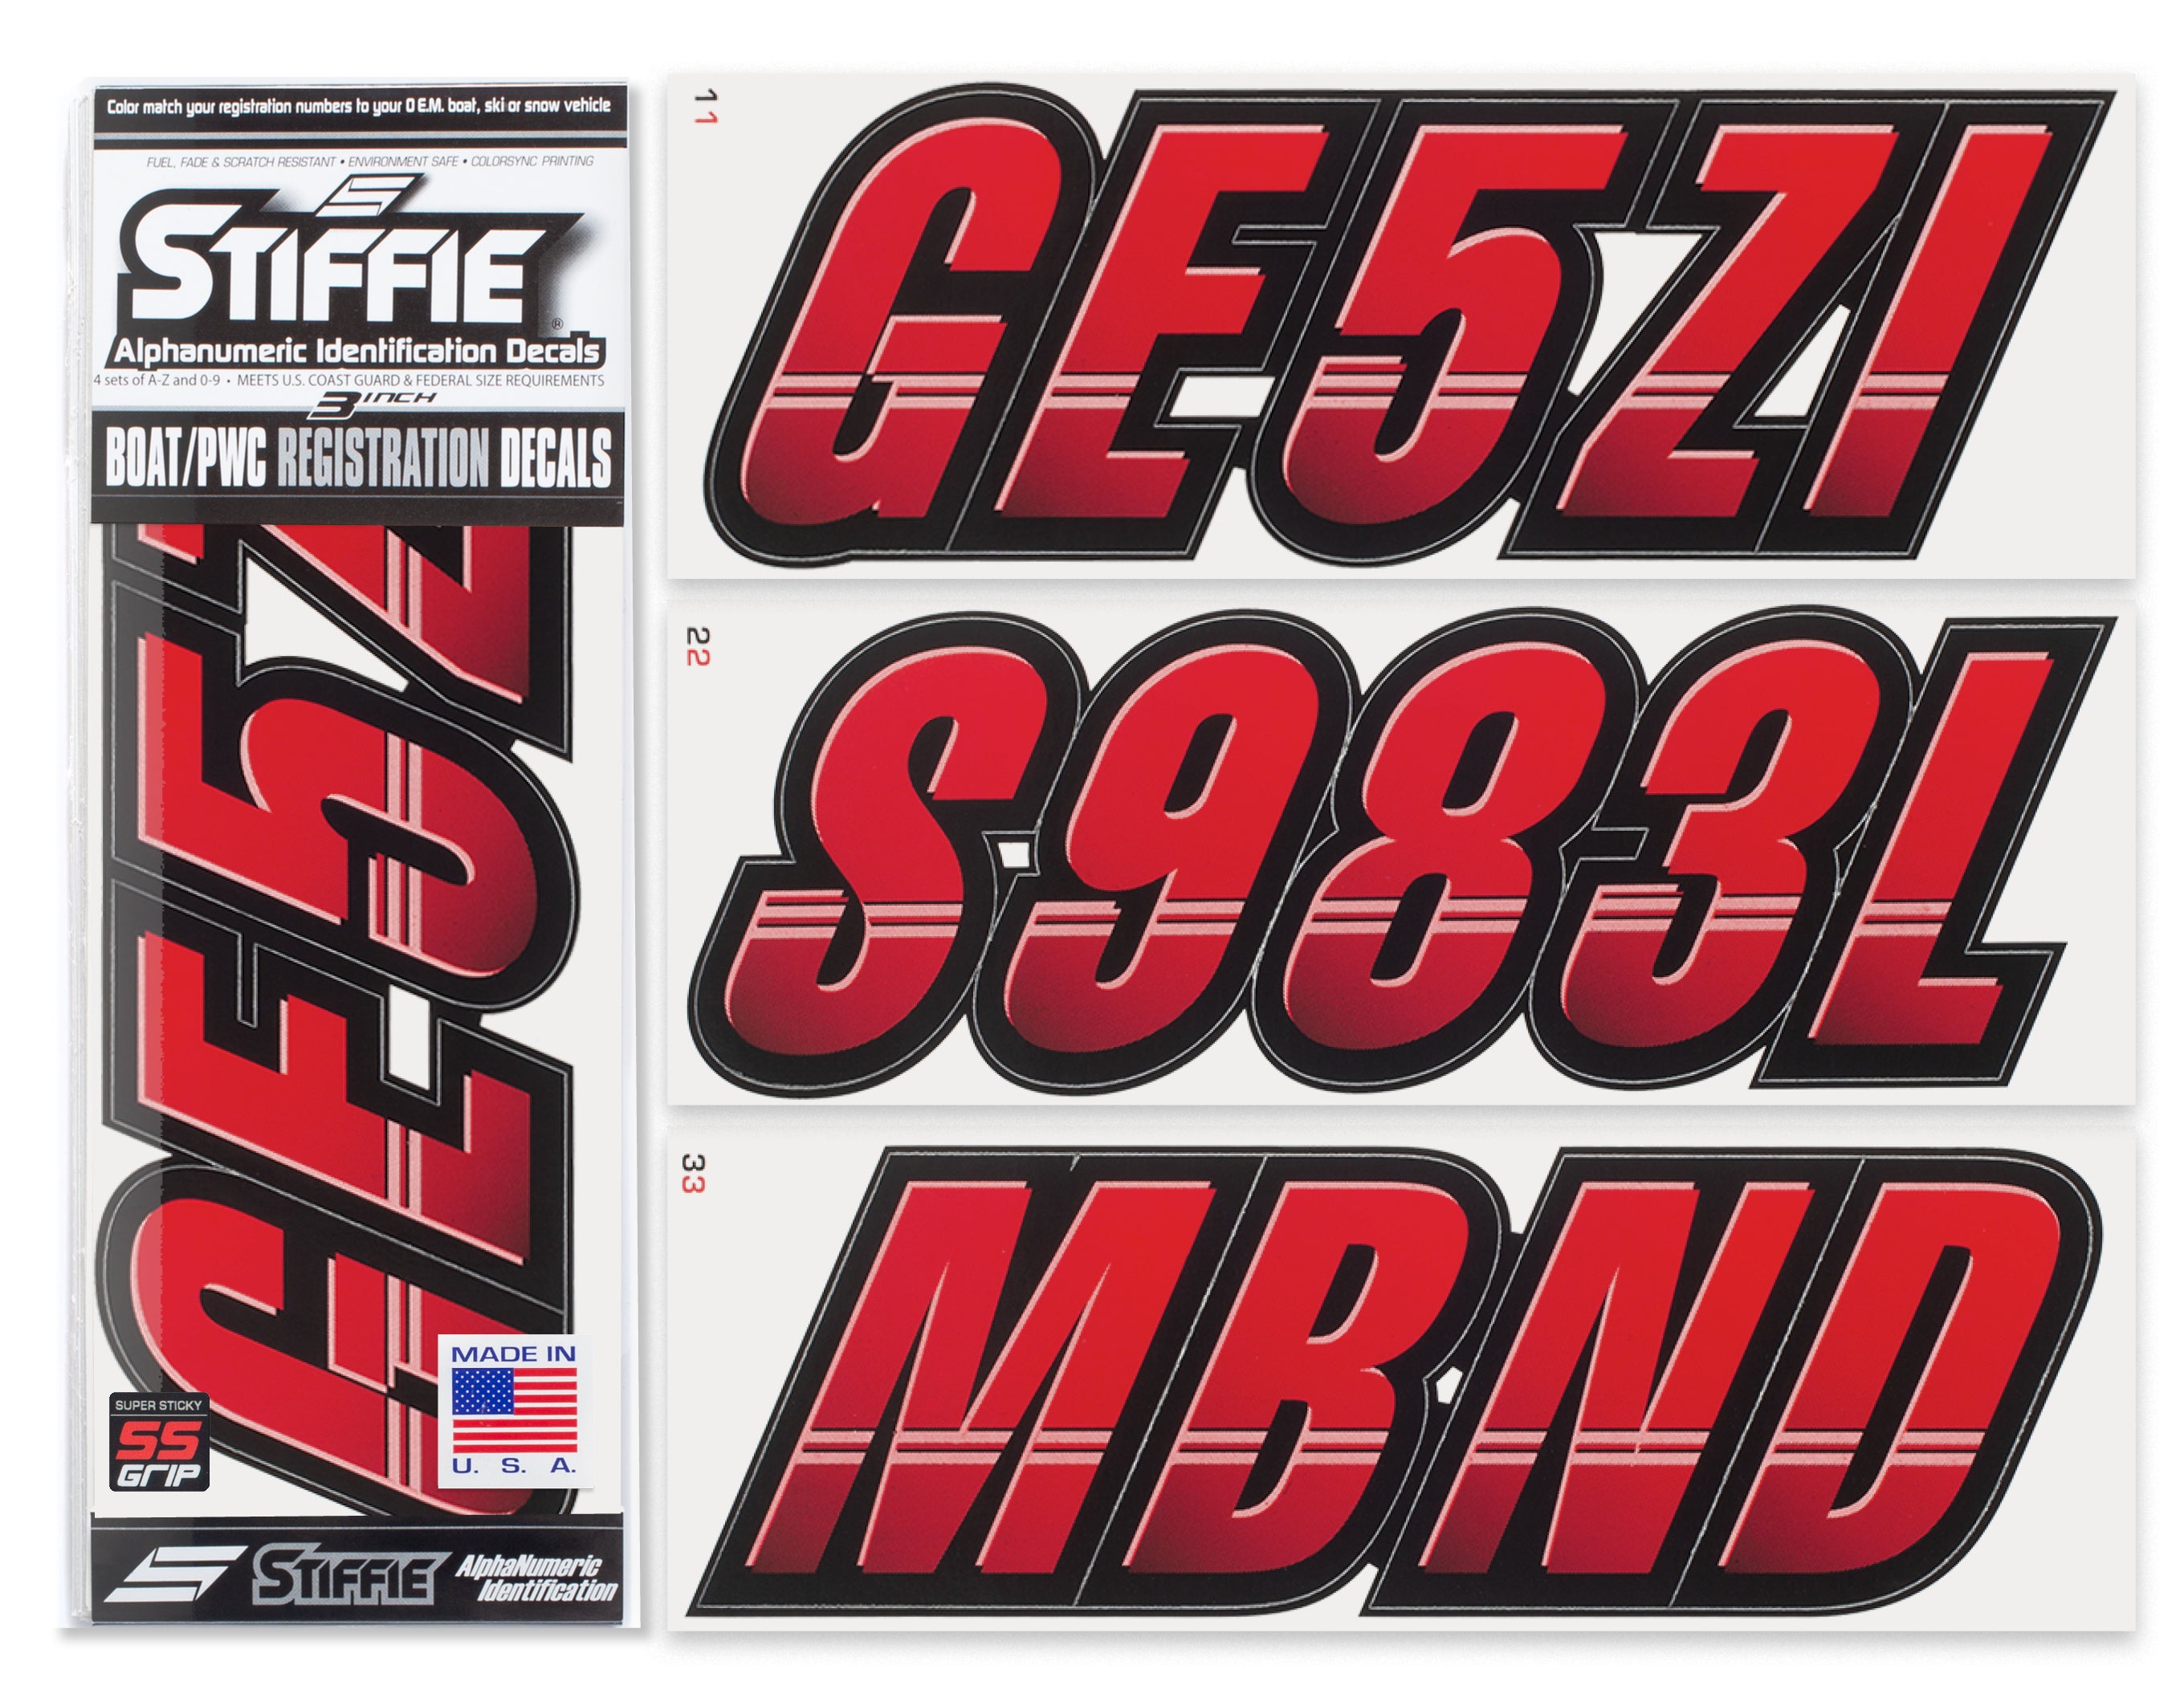 Stiffie Techtron Red/Black Super Sticky 3" Alpha Numeric Registration Identification Numbers Stickers Decals for Sea-Doo Spark, Inflatable Boats, Ribs, Hypalon/PVC, PWC and Boats.